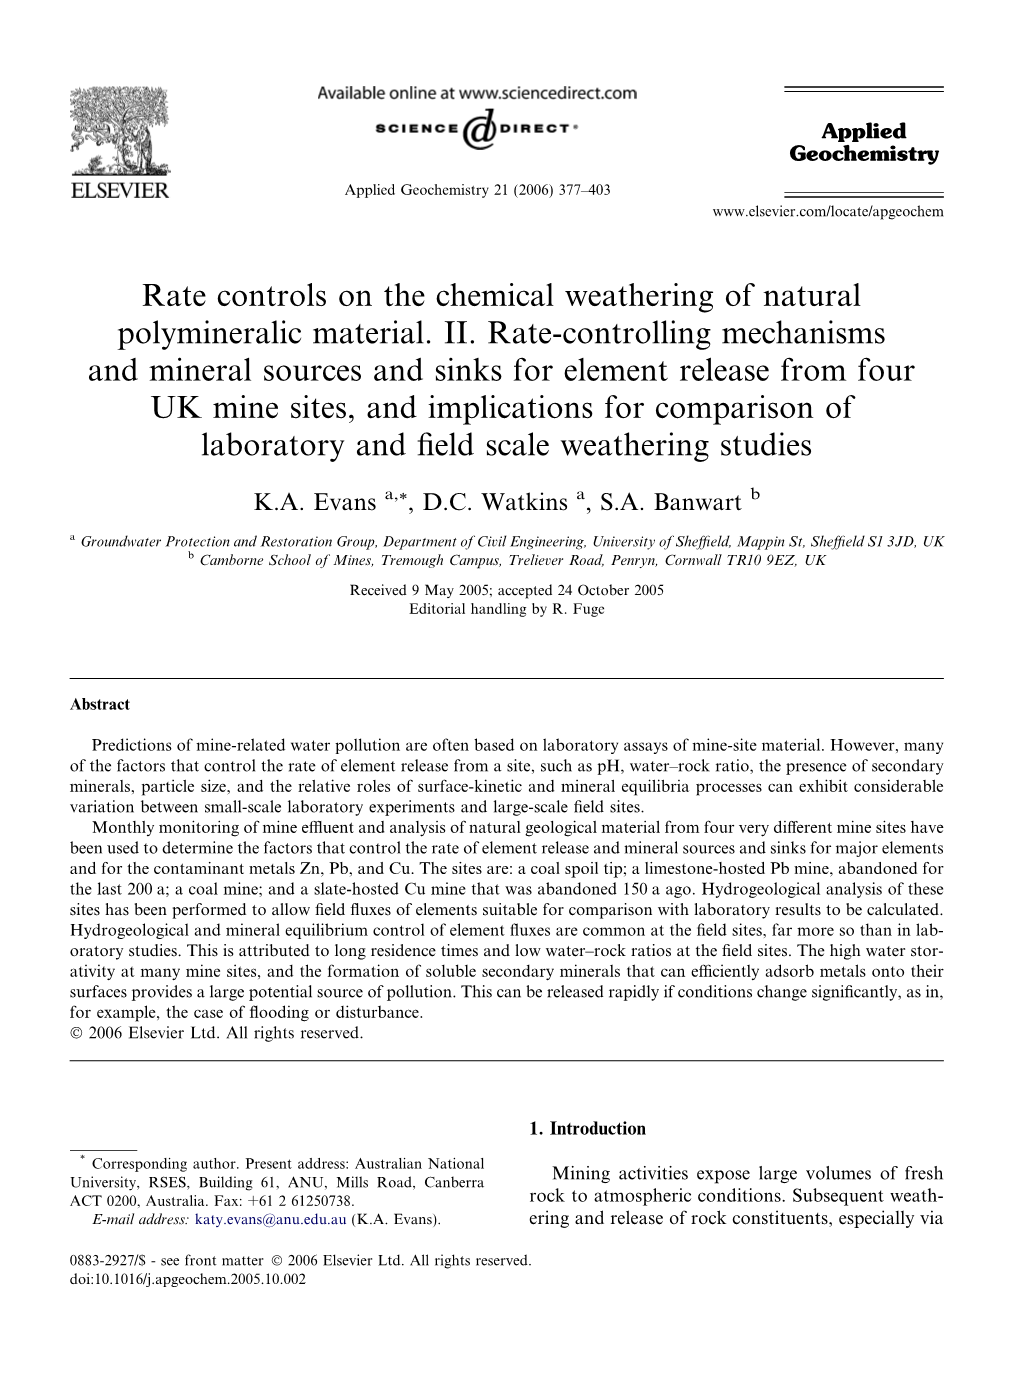 Rate Controls on the Chemical Weathering of Natural Polymineralic Material